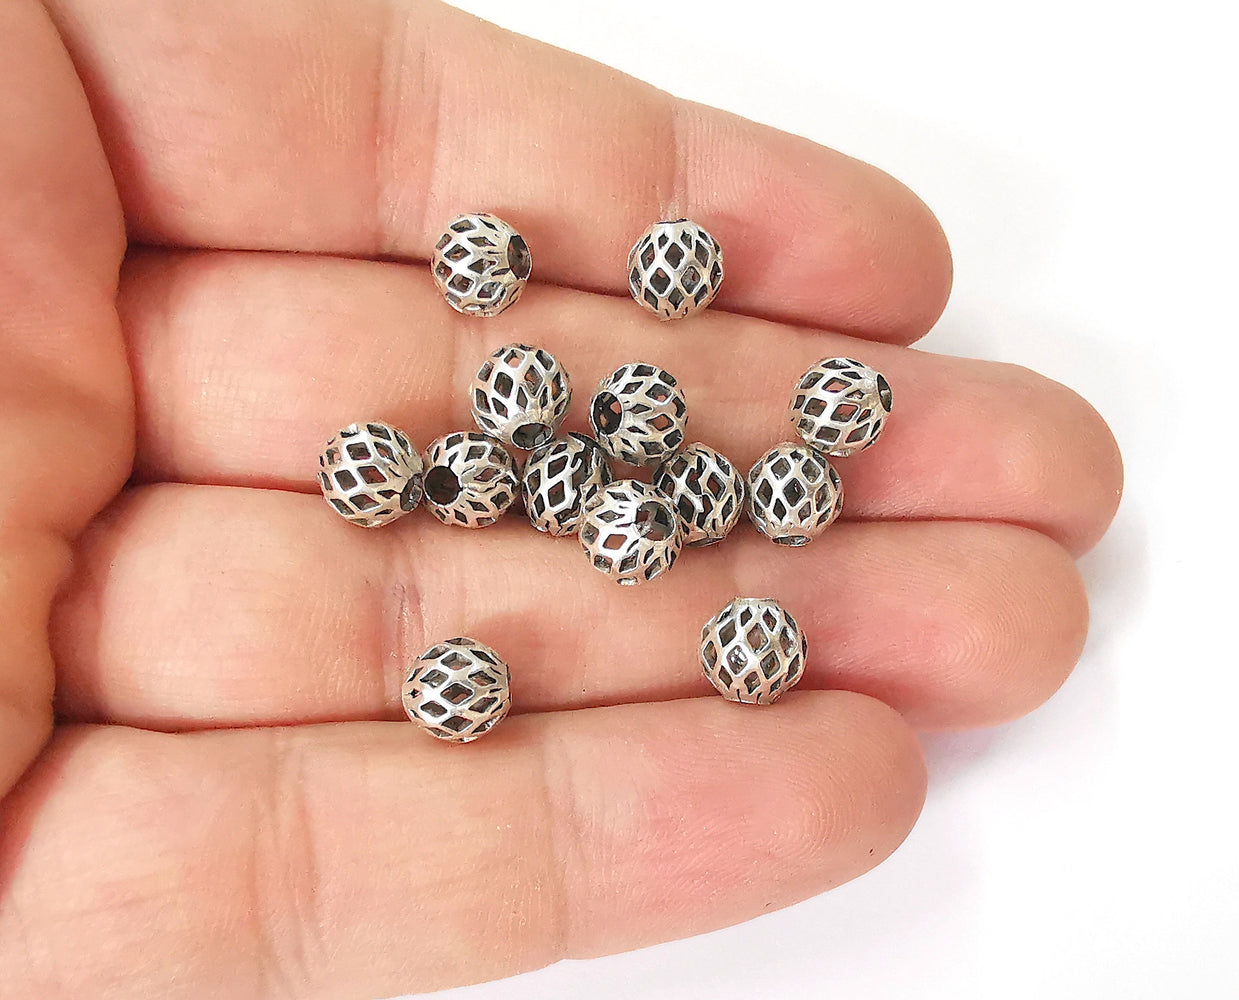 10 Silver beads Antique silver plated brass beads (8mm) G23768